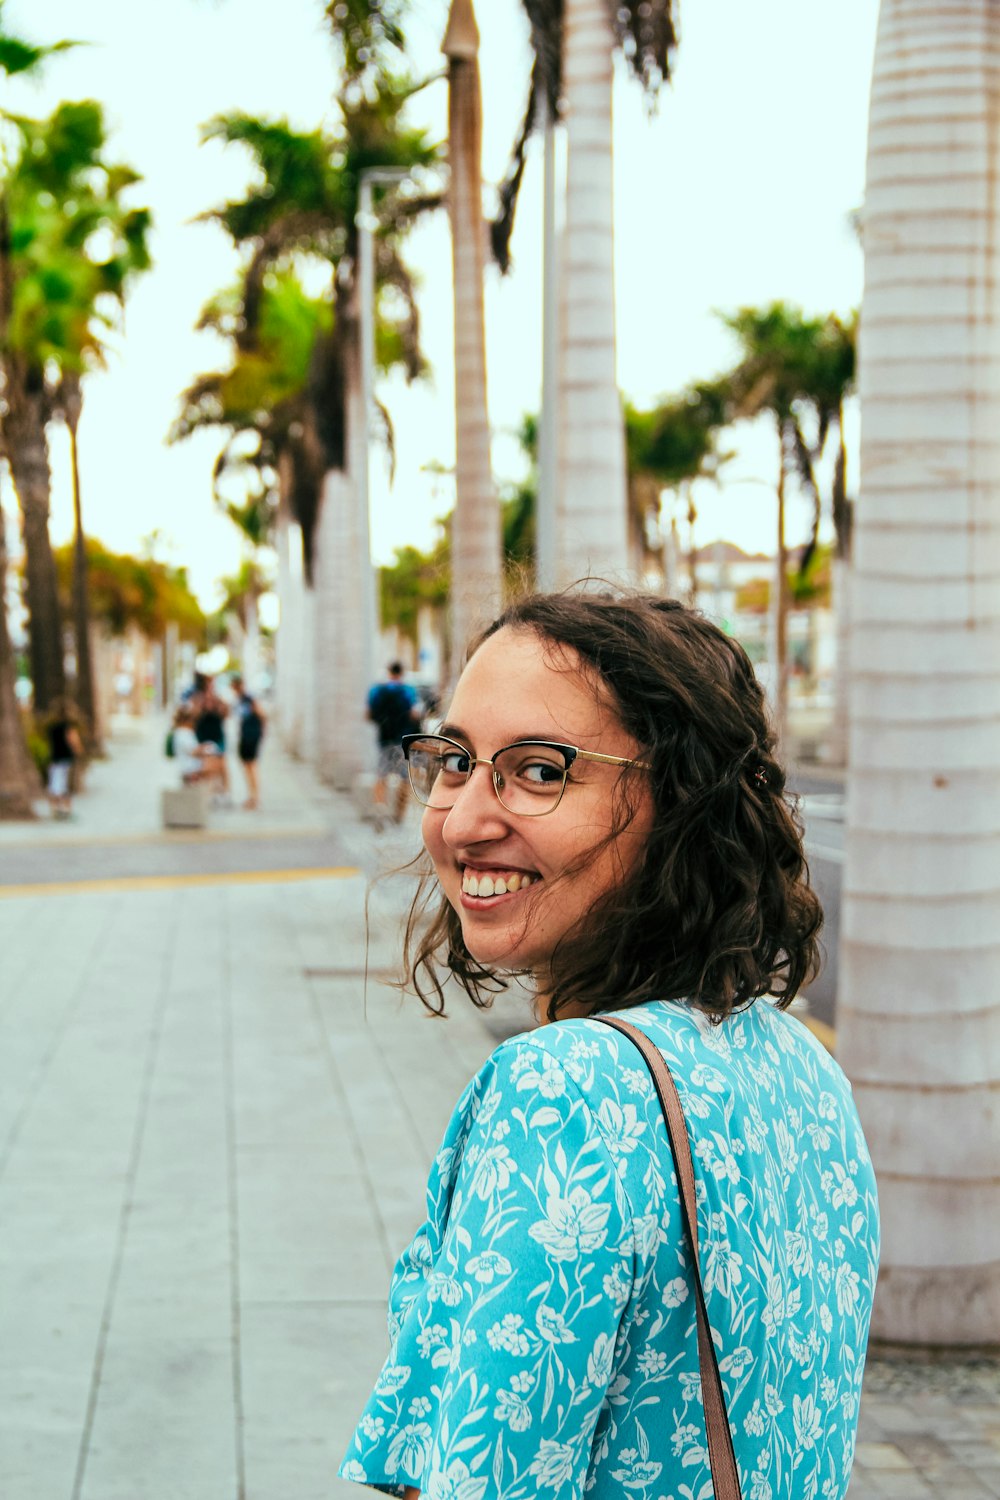 a woman in a blue top is smiling for the camera